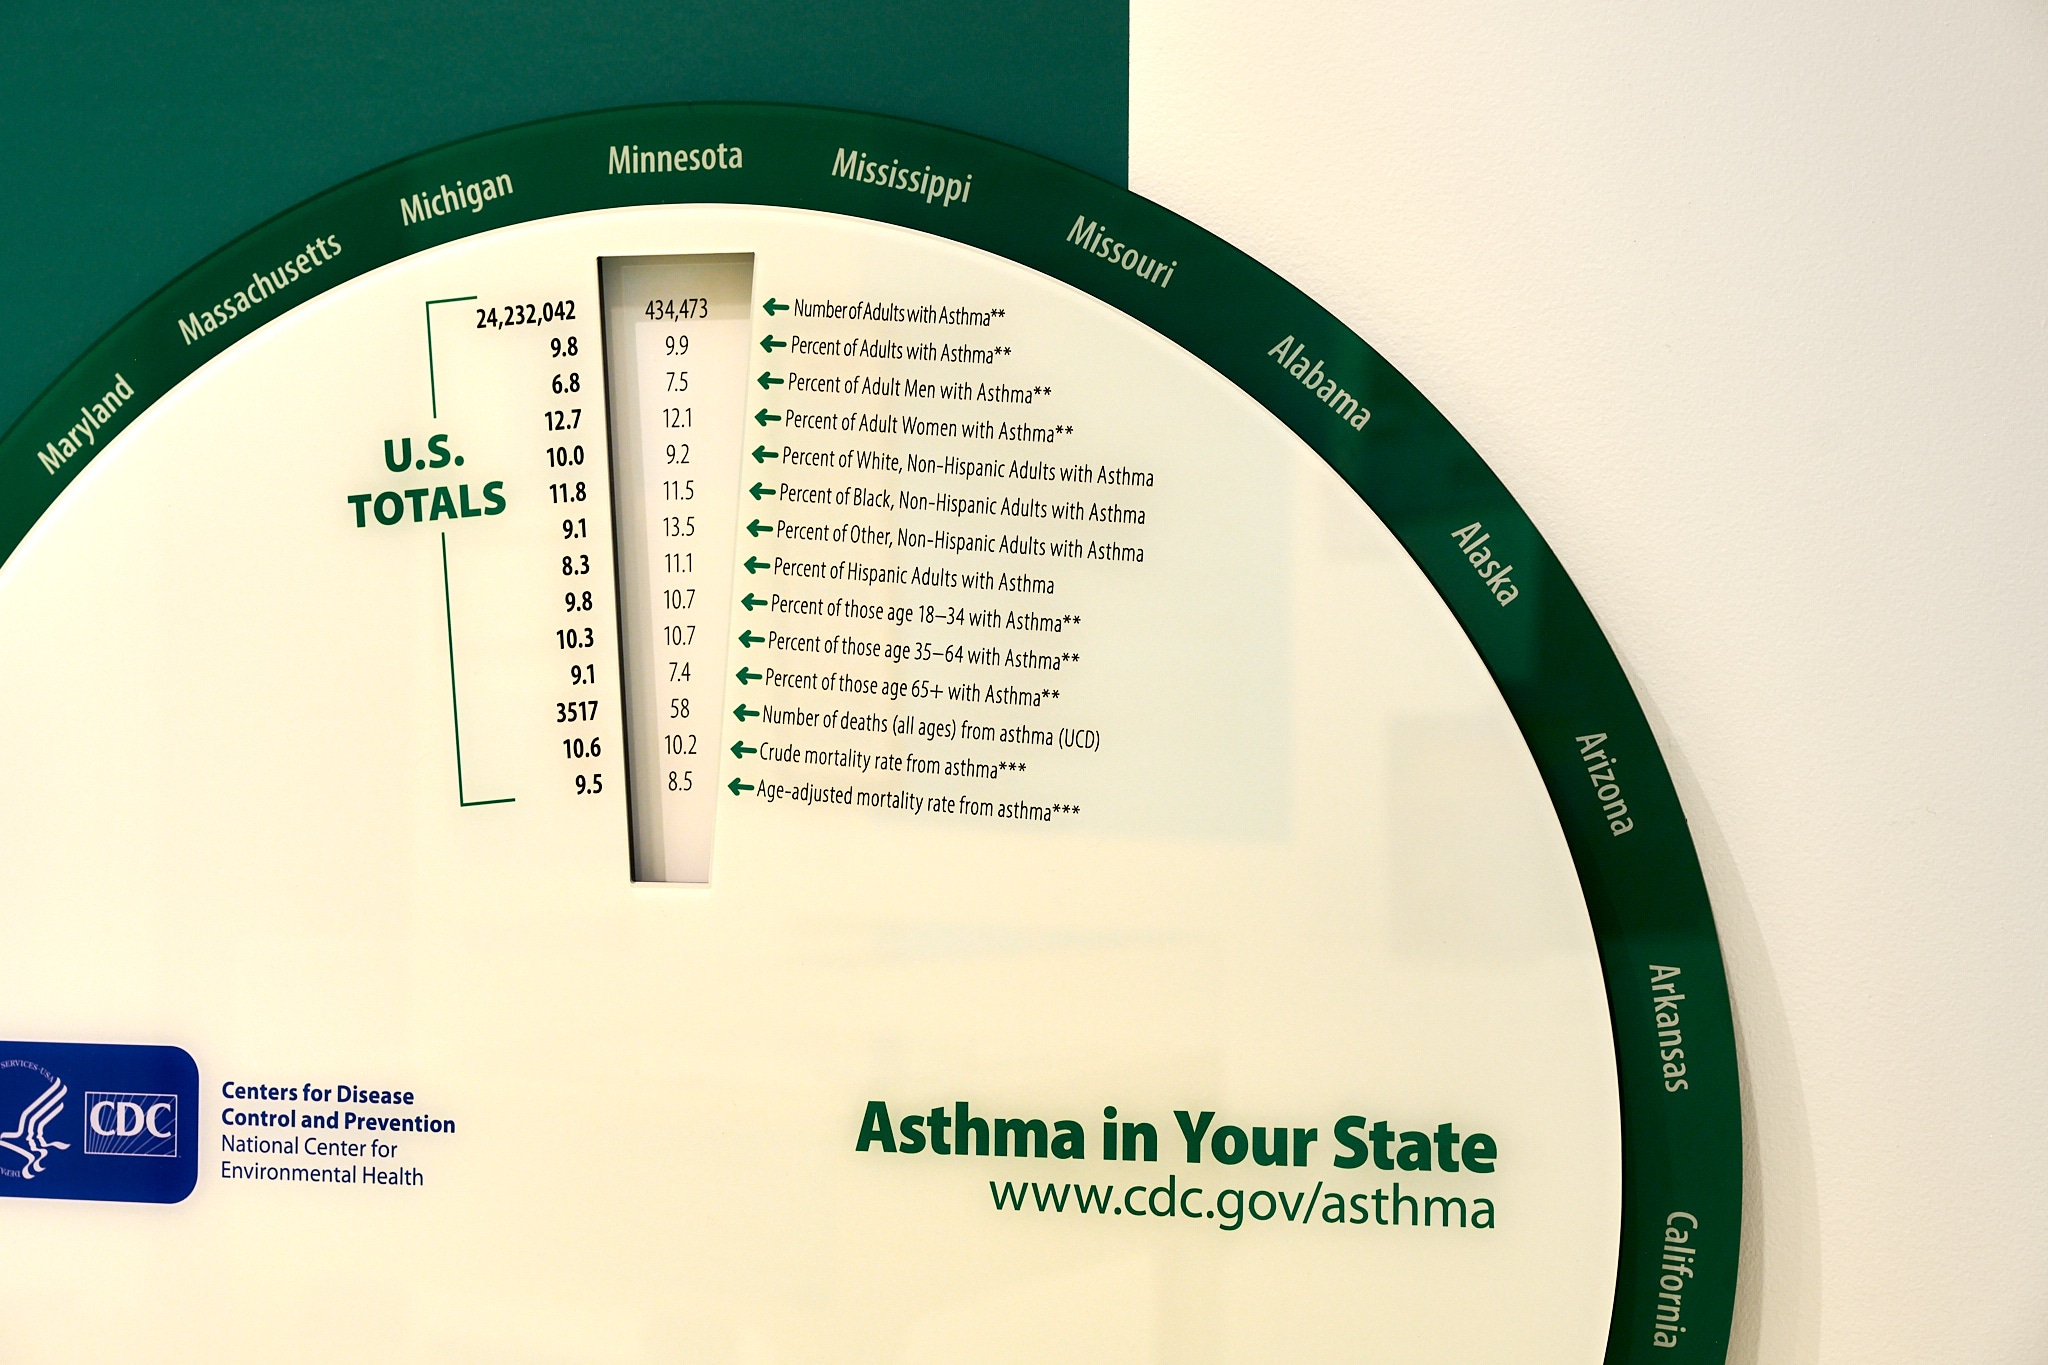 Asthma in your state exhibit wheel